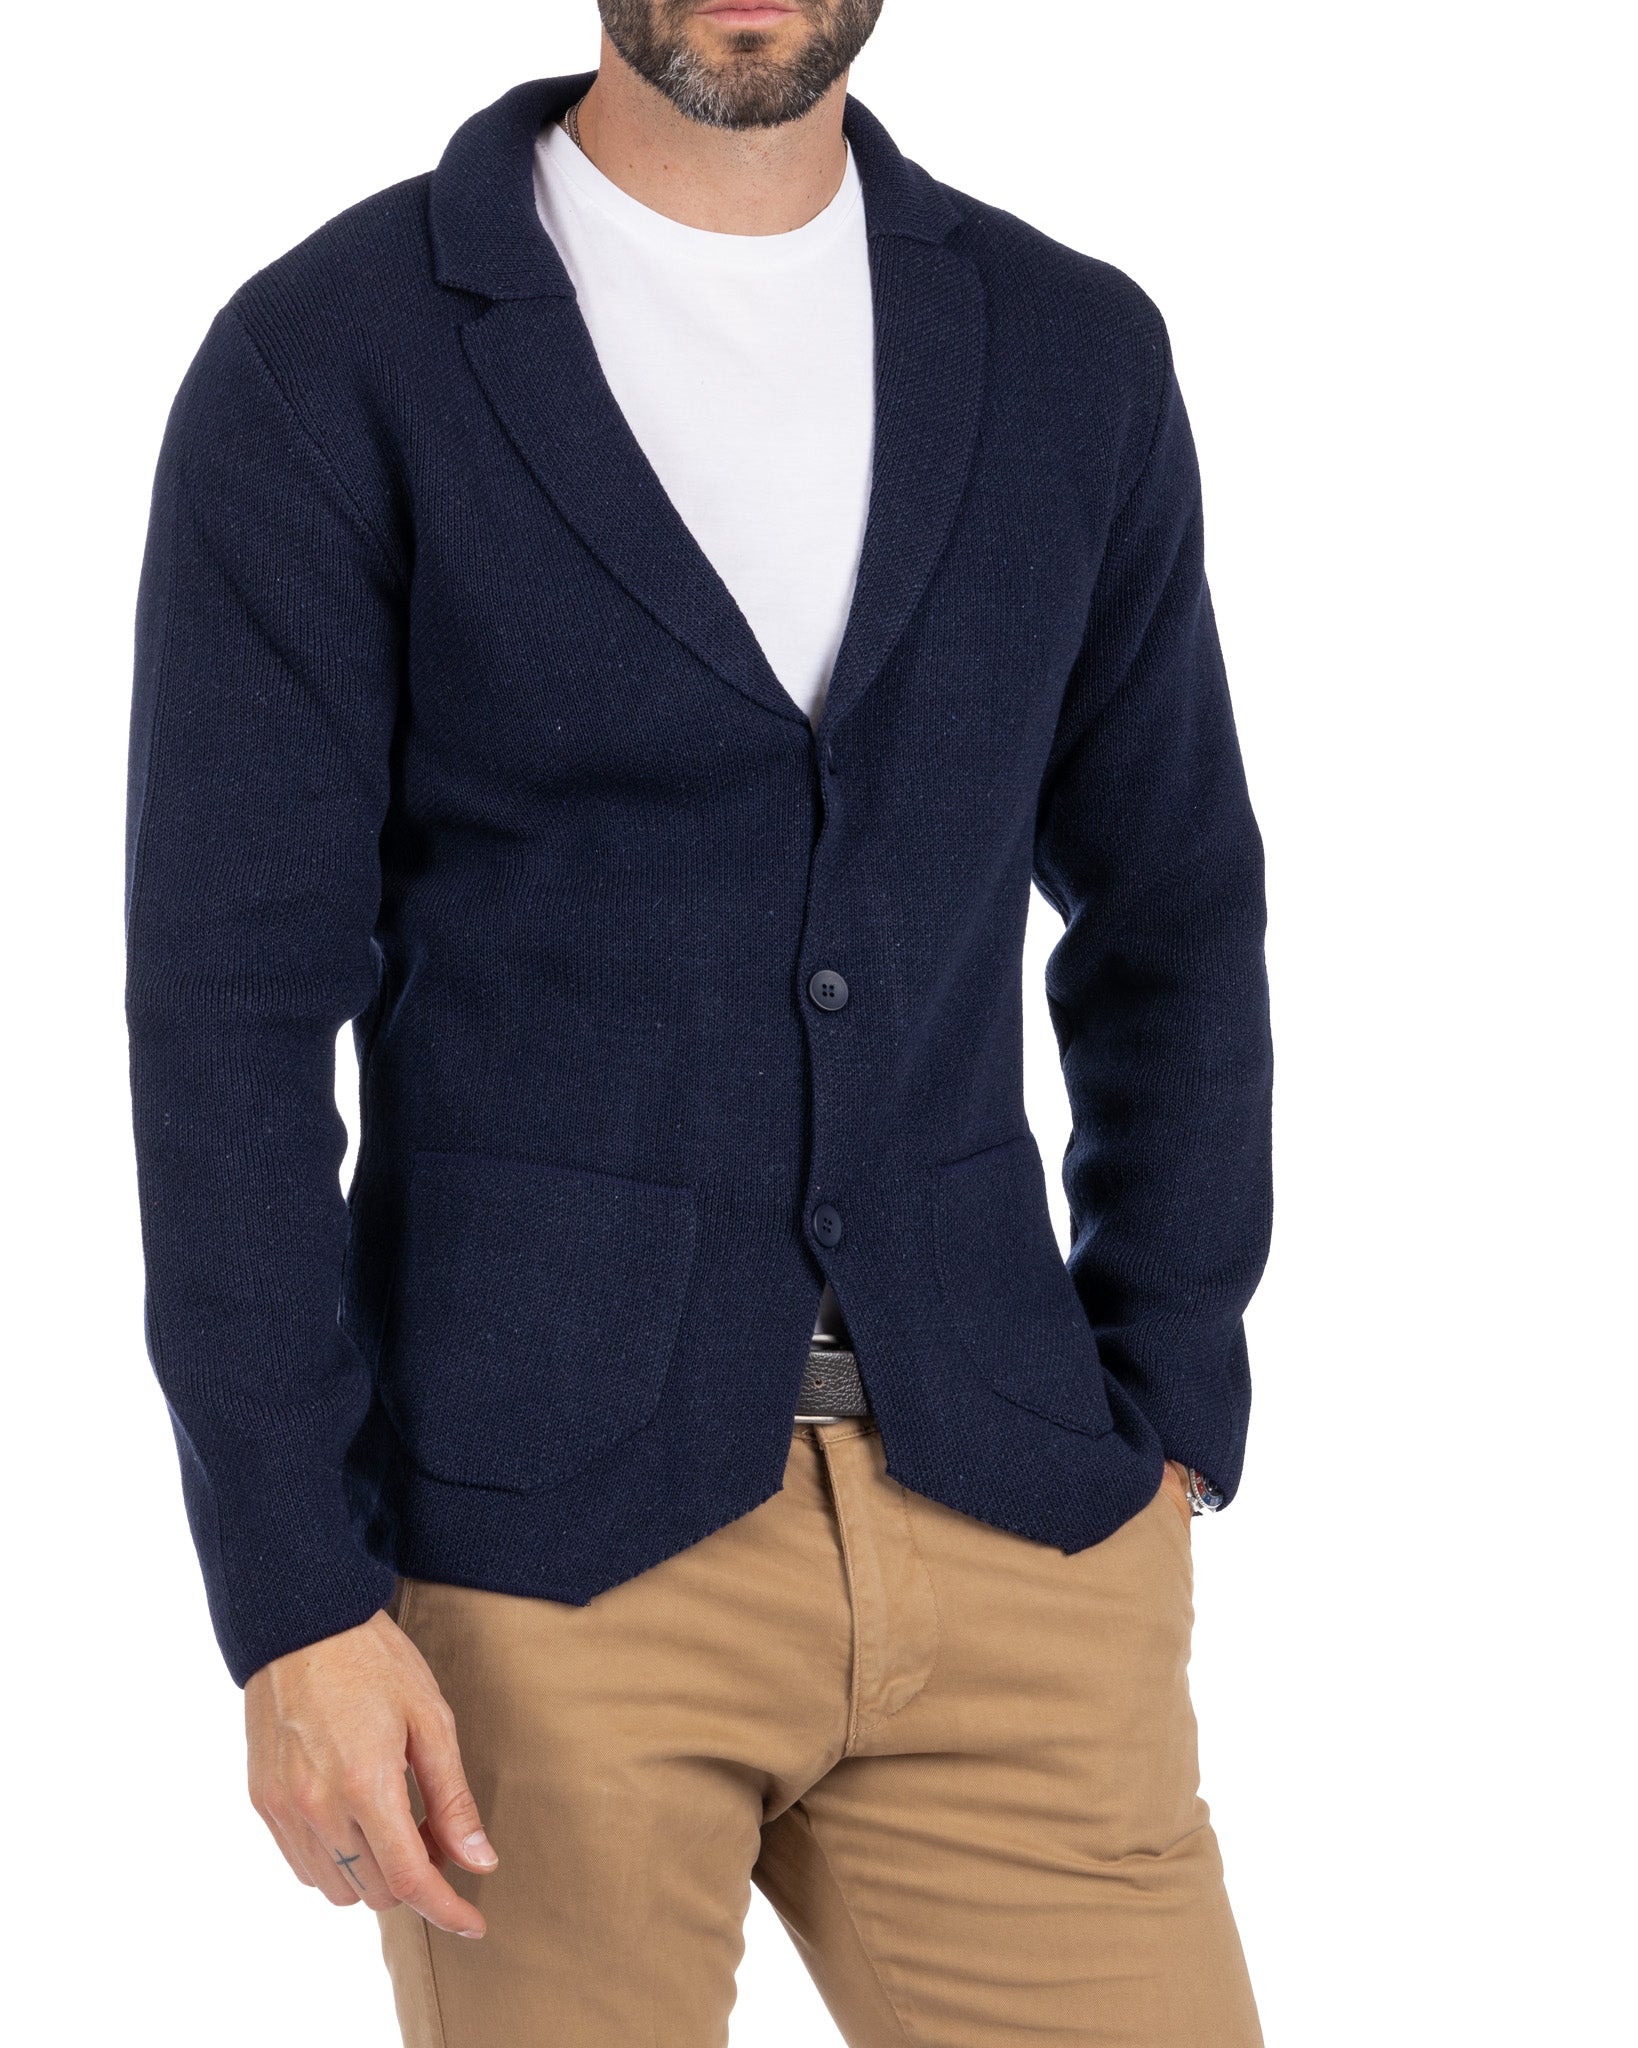 Laurent - blue knitted cardigan